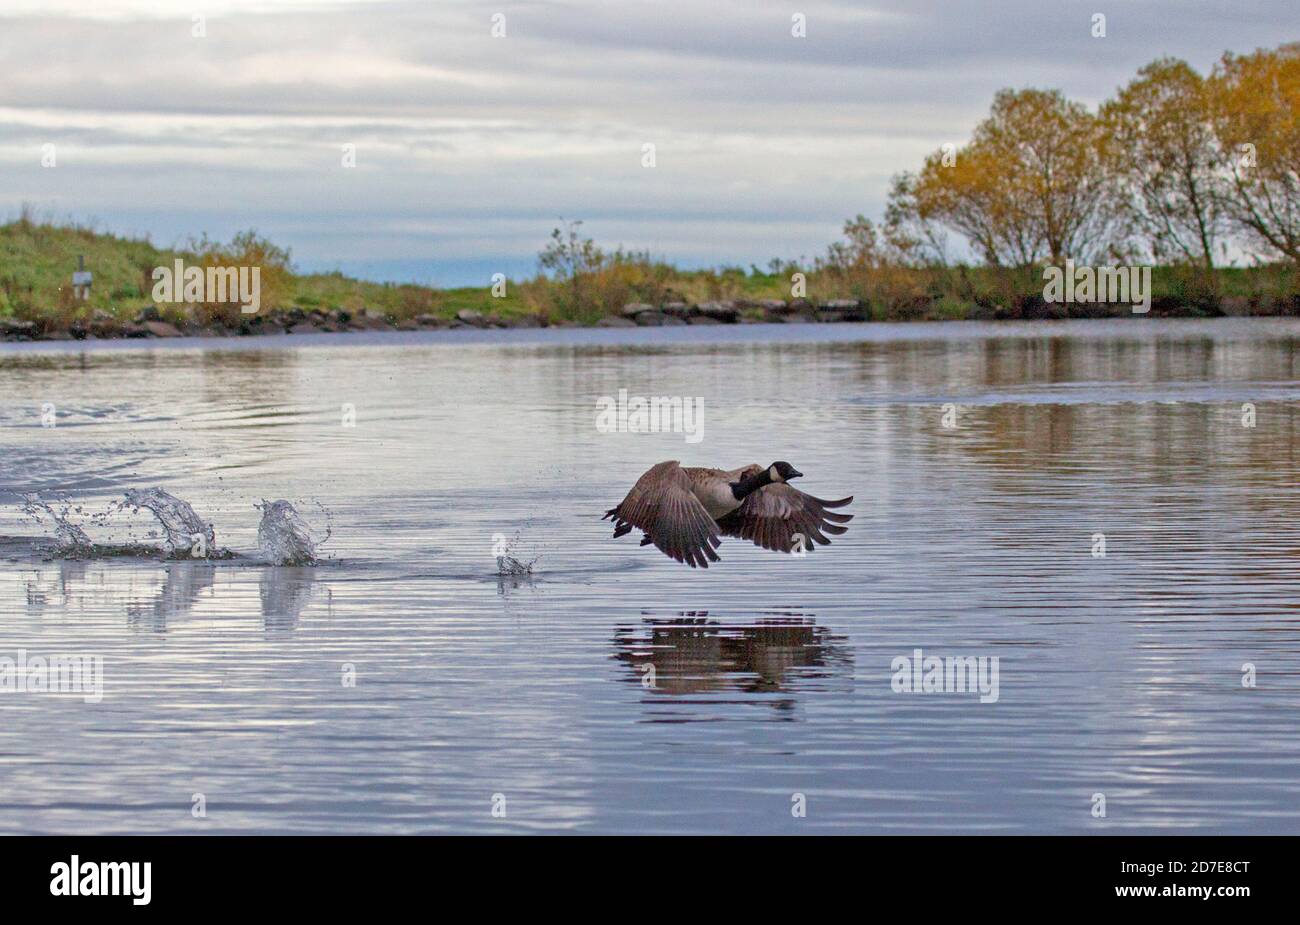 Holyrood Park, Edinburgh, Scotland, UK. 22 October 2020. Cloudy with temperture of 12 degrees, Pictured: Canada Goose taking flight over the Loch surface. Stock Photo